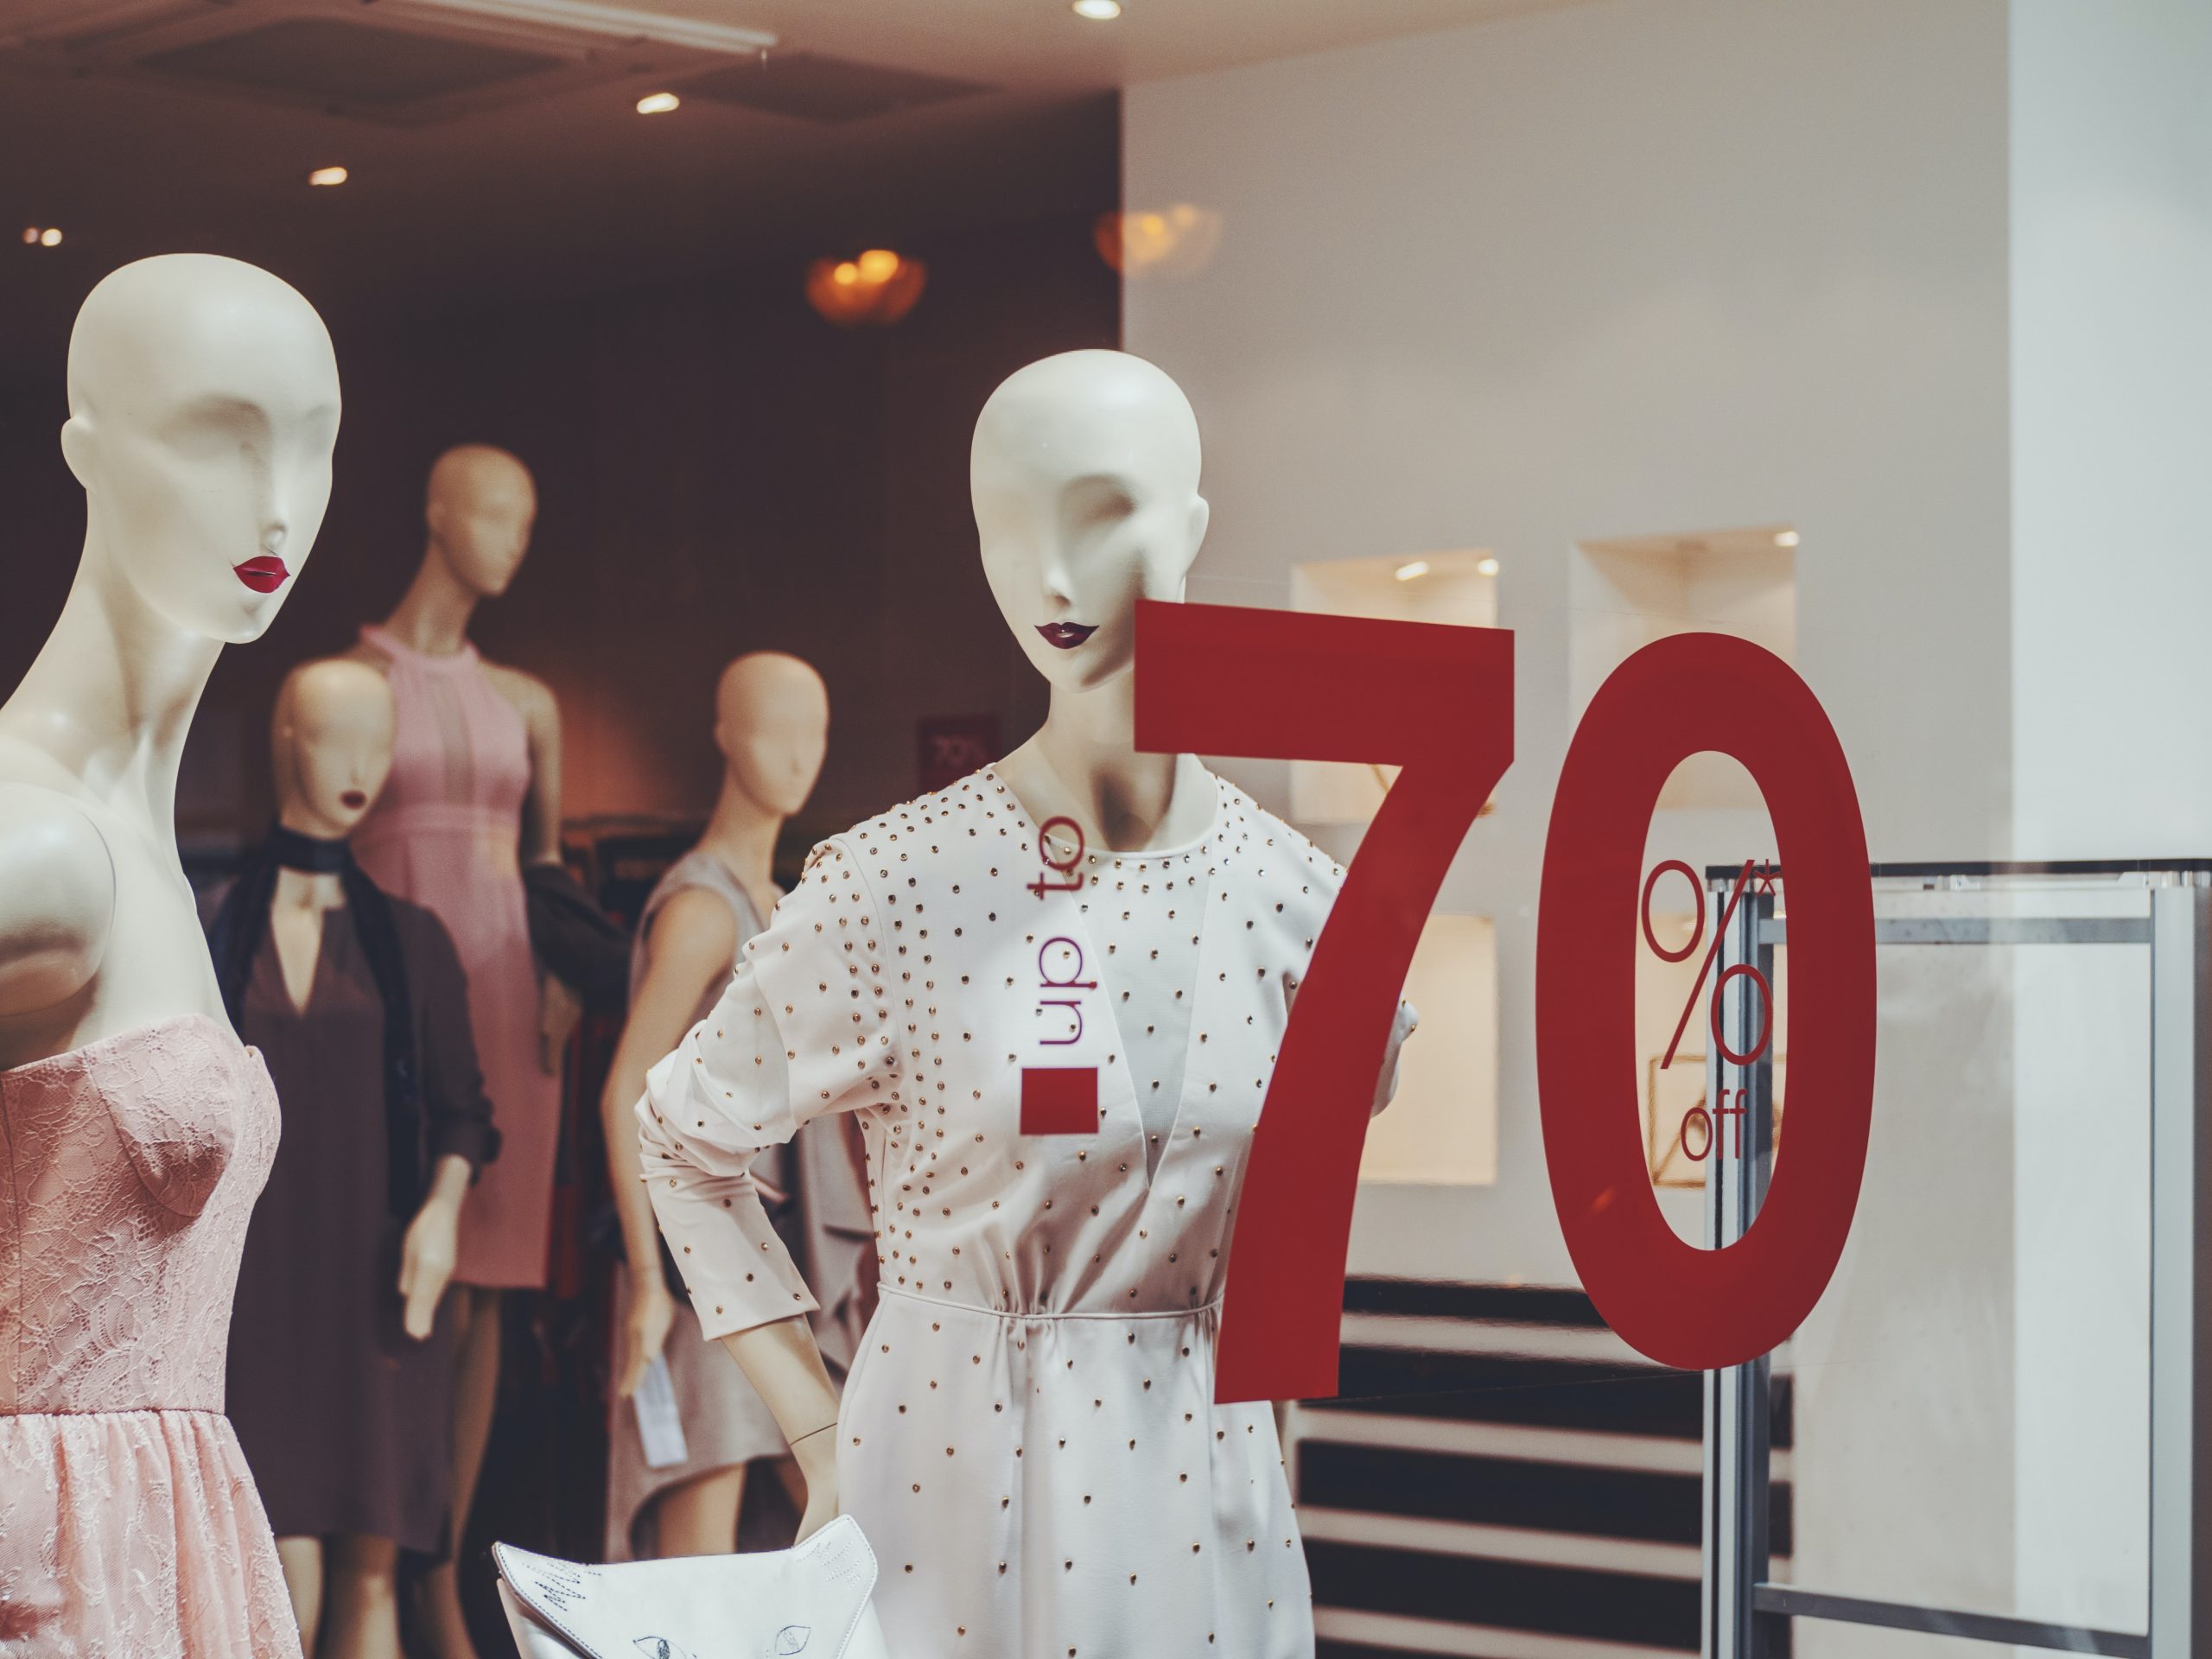 Buyer Value Proposition For Retail: How To Flip Browsers To Consumers